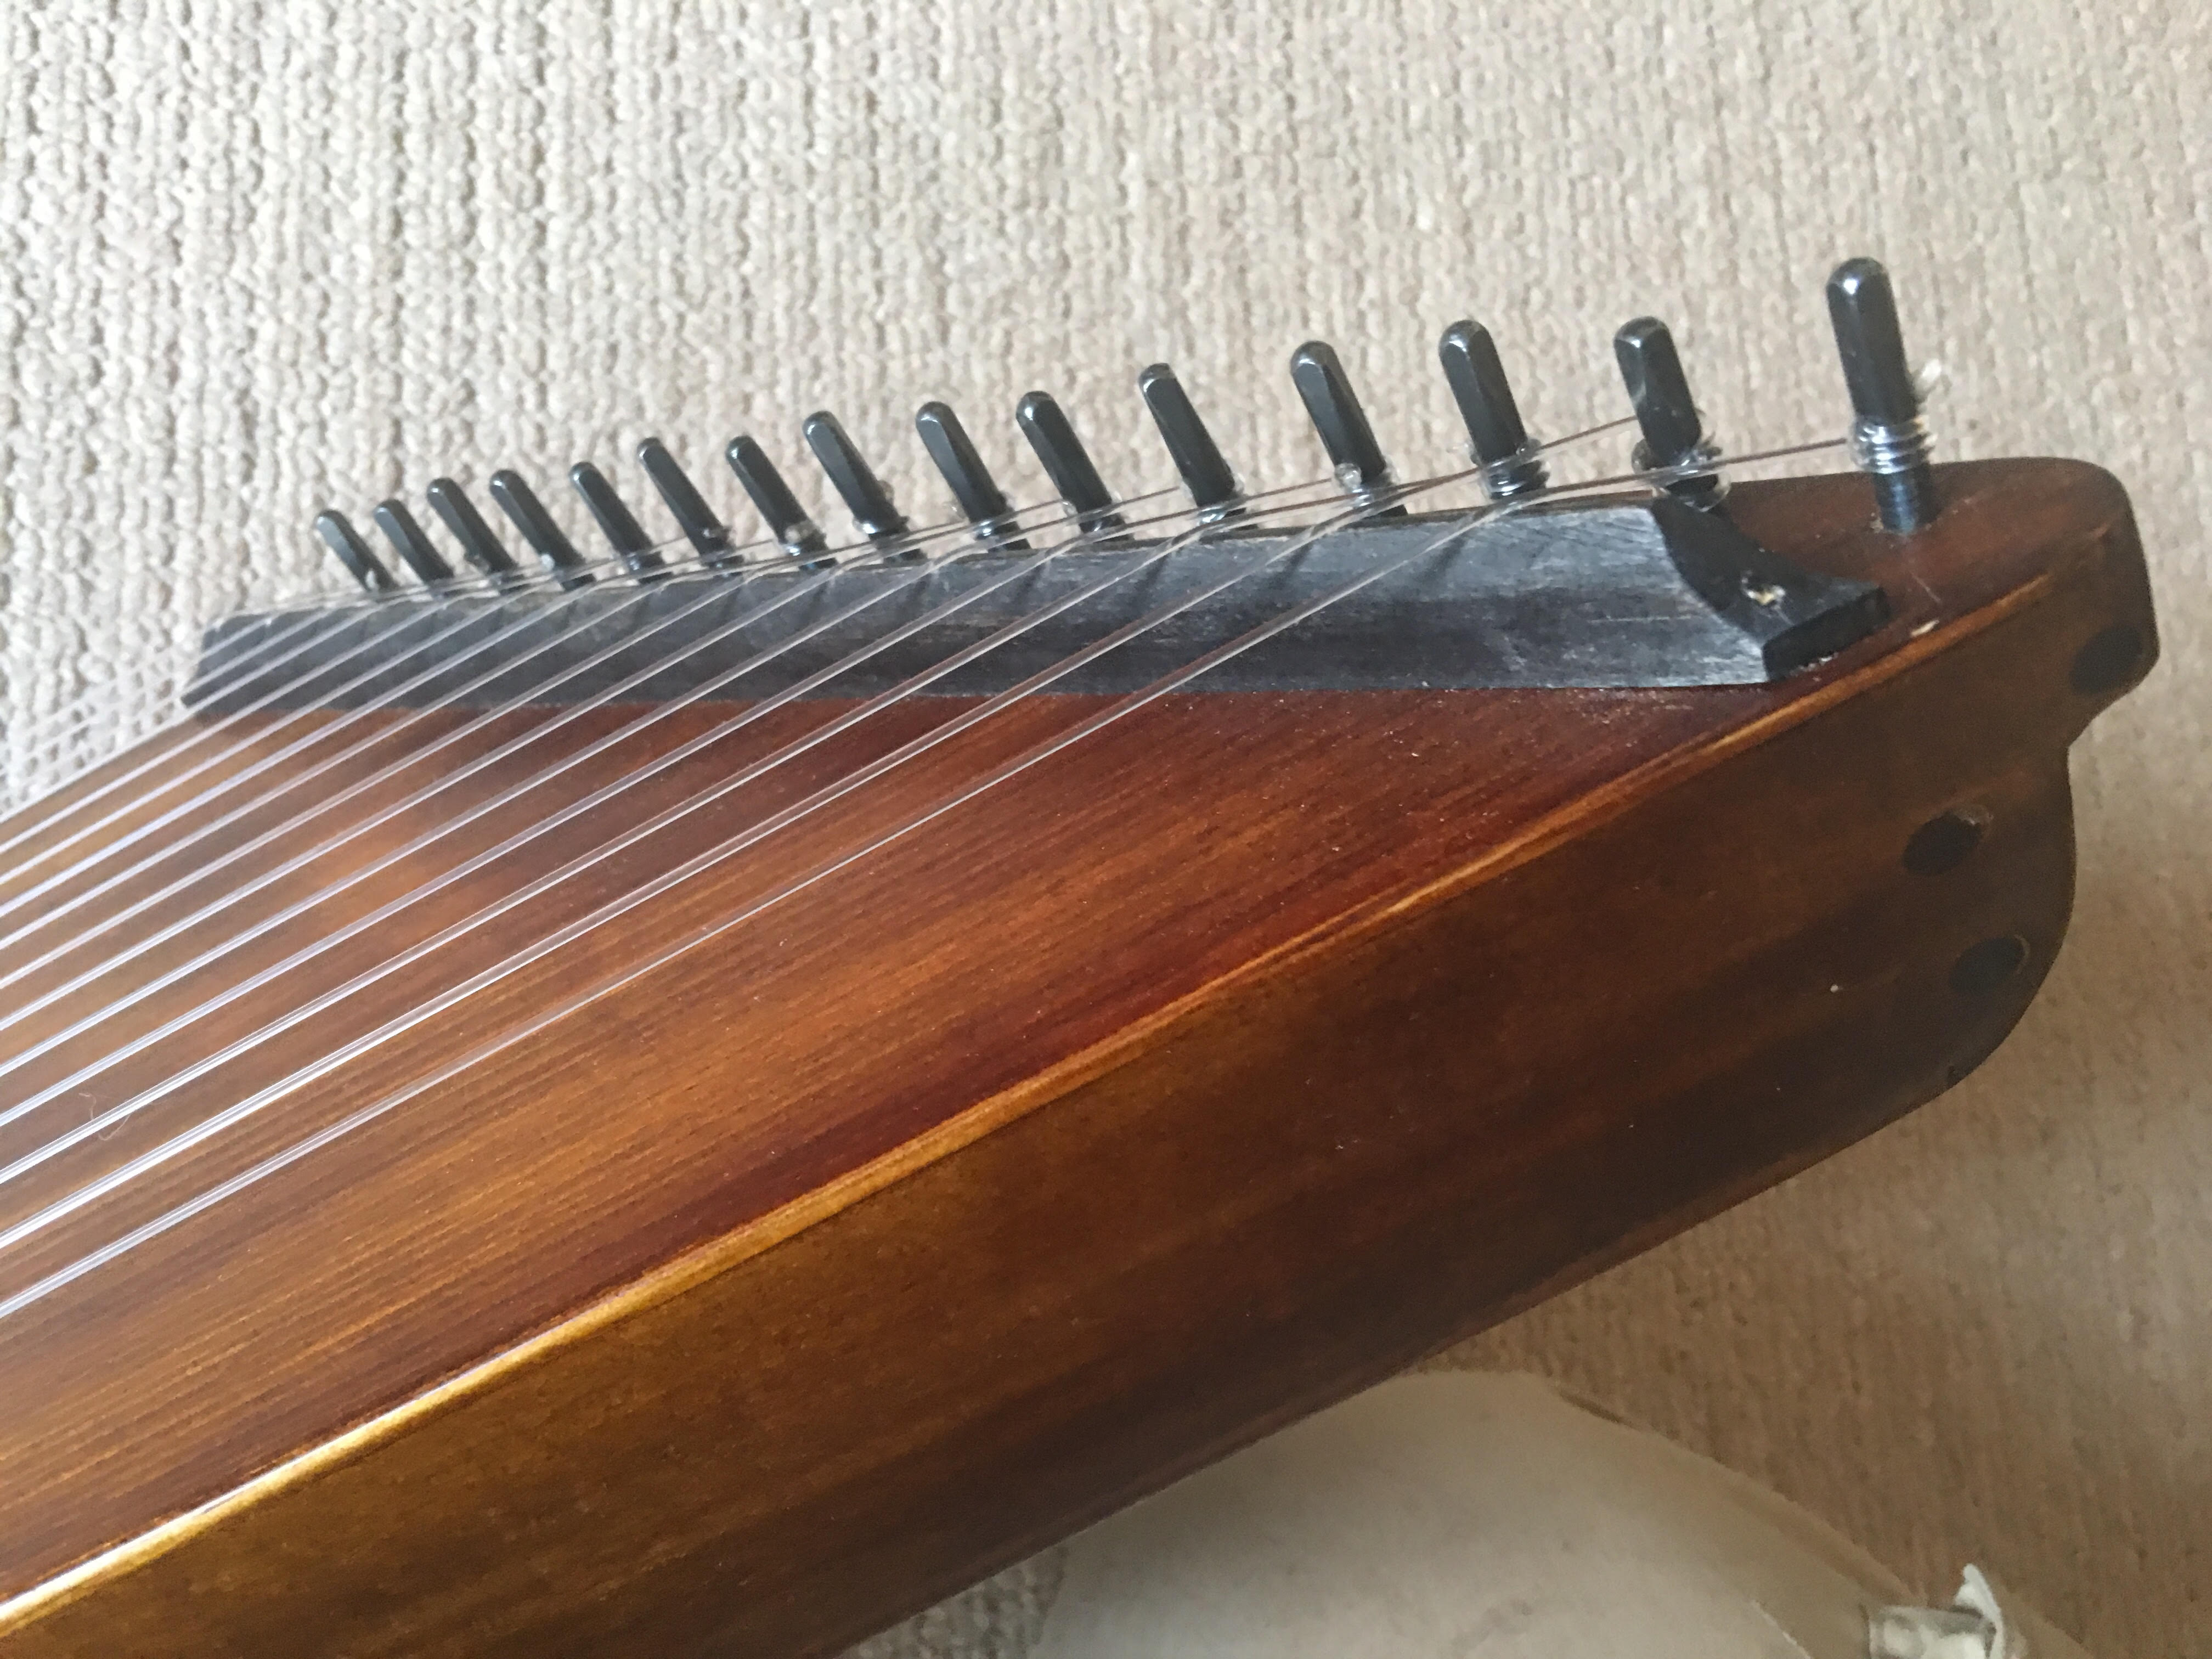 fluorocarbon stringed psaltery in G